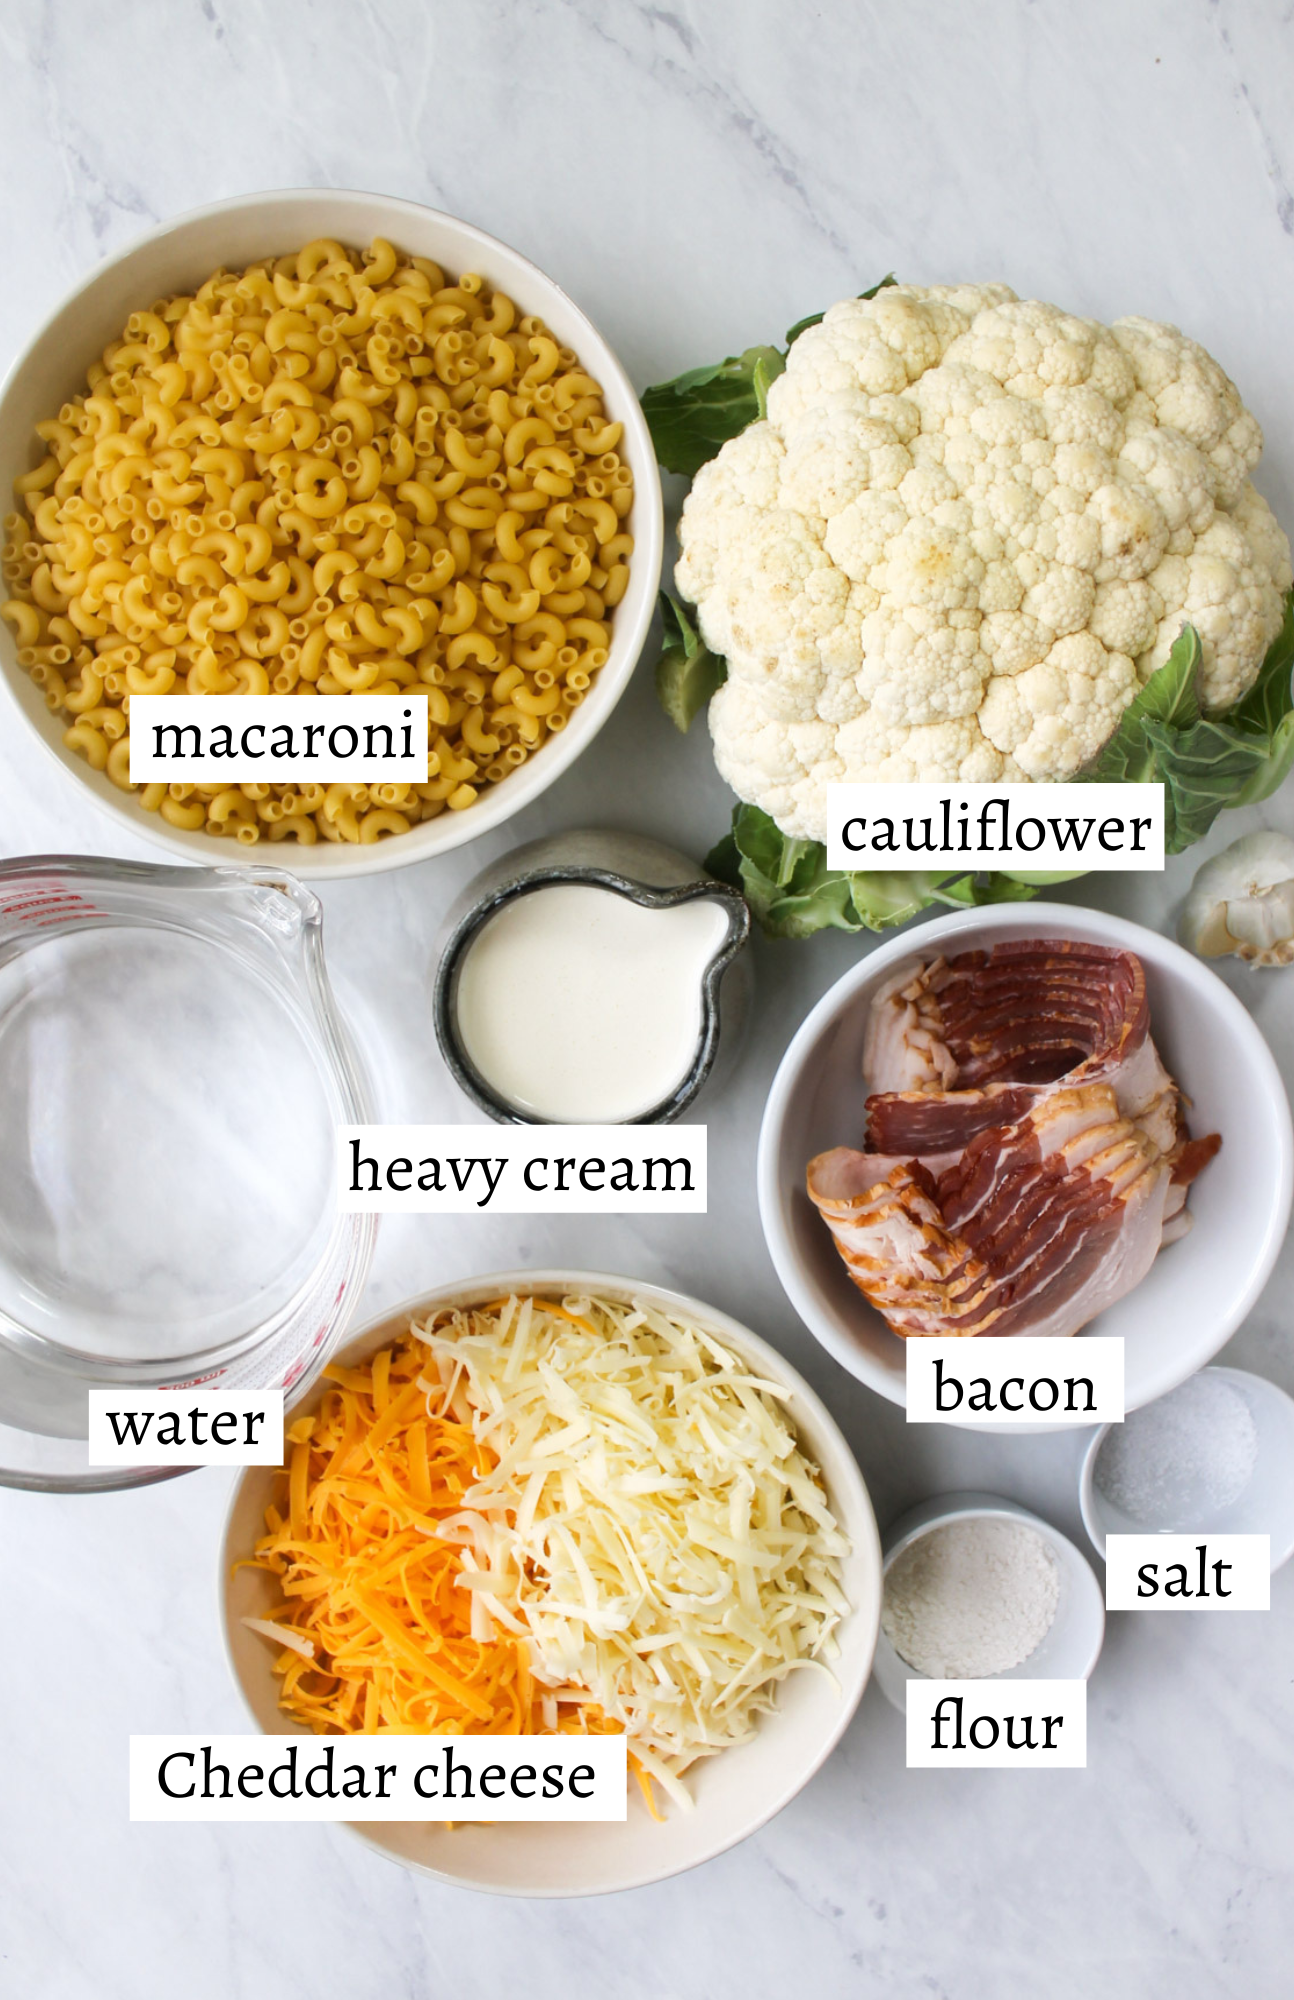 Labeled ingredients for Bacon Cauliflower Mac and Cheese.